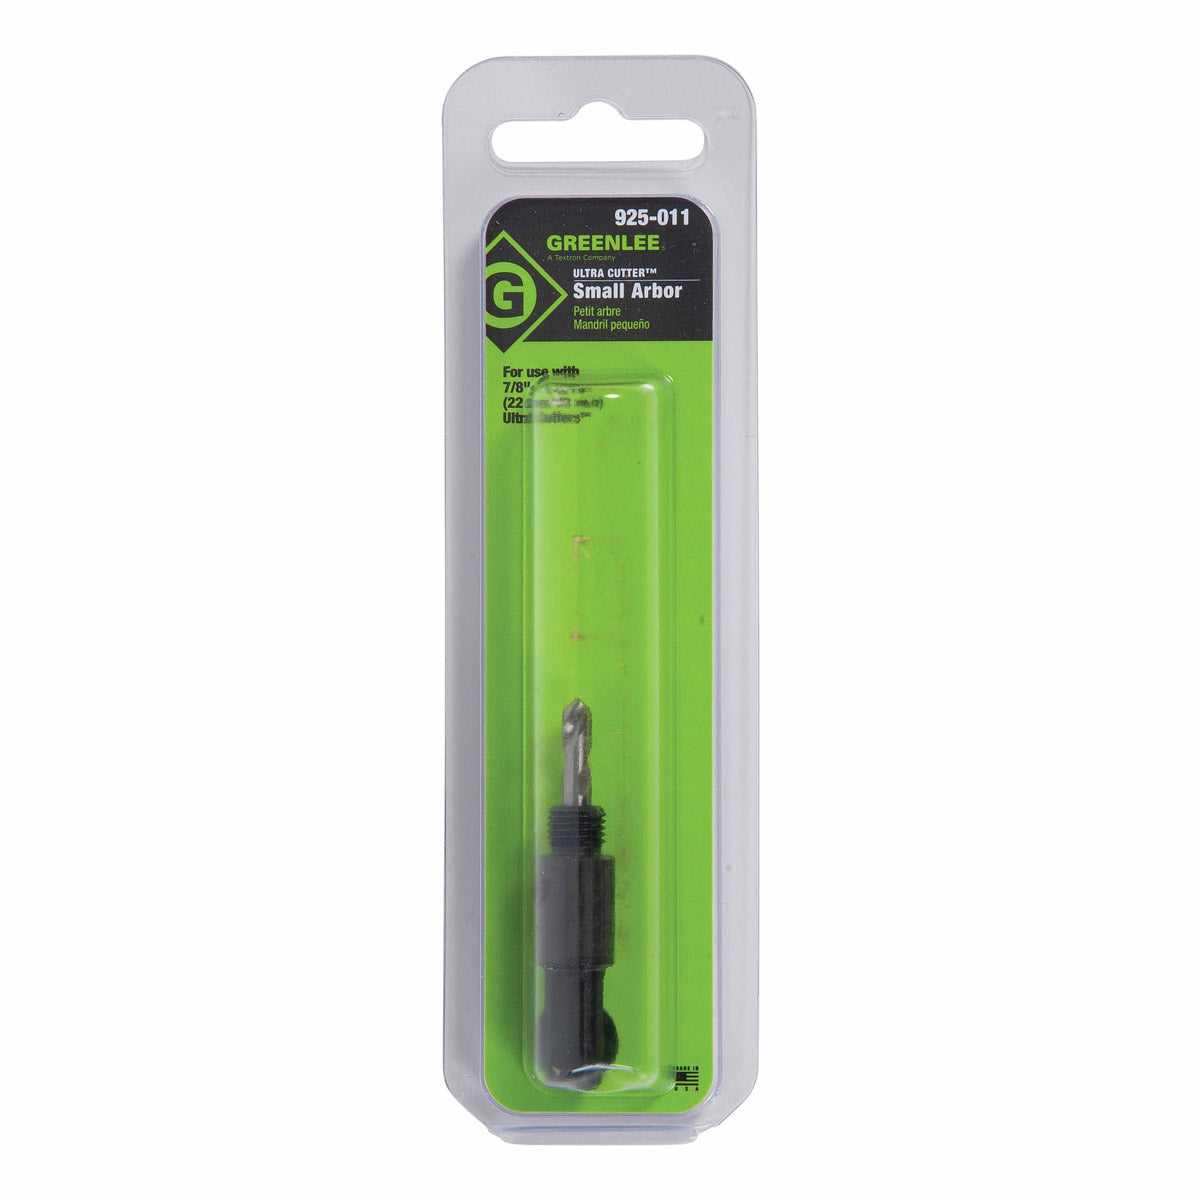 Greenlee 925-011 Small Arbor with Pilot drill for 7/8" to 1-1/8" Size Cutter